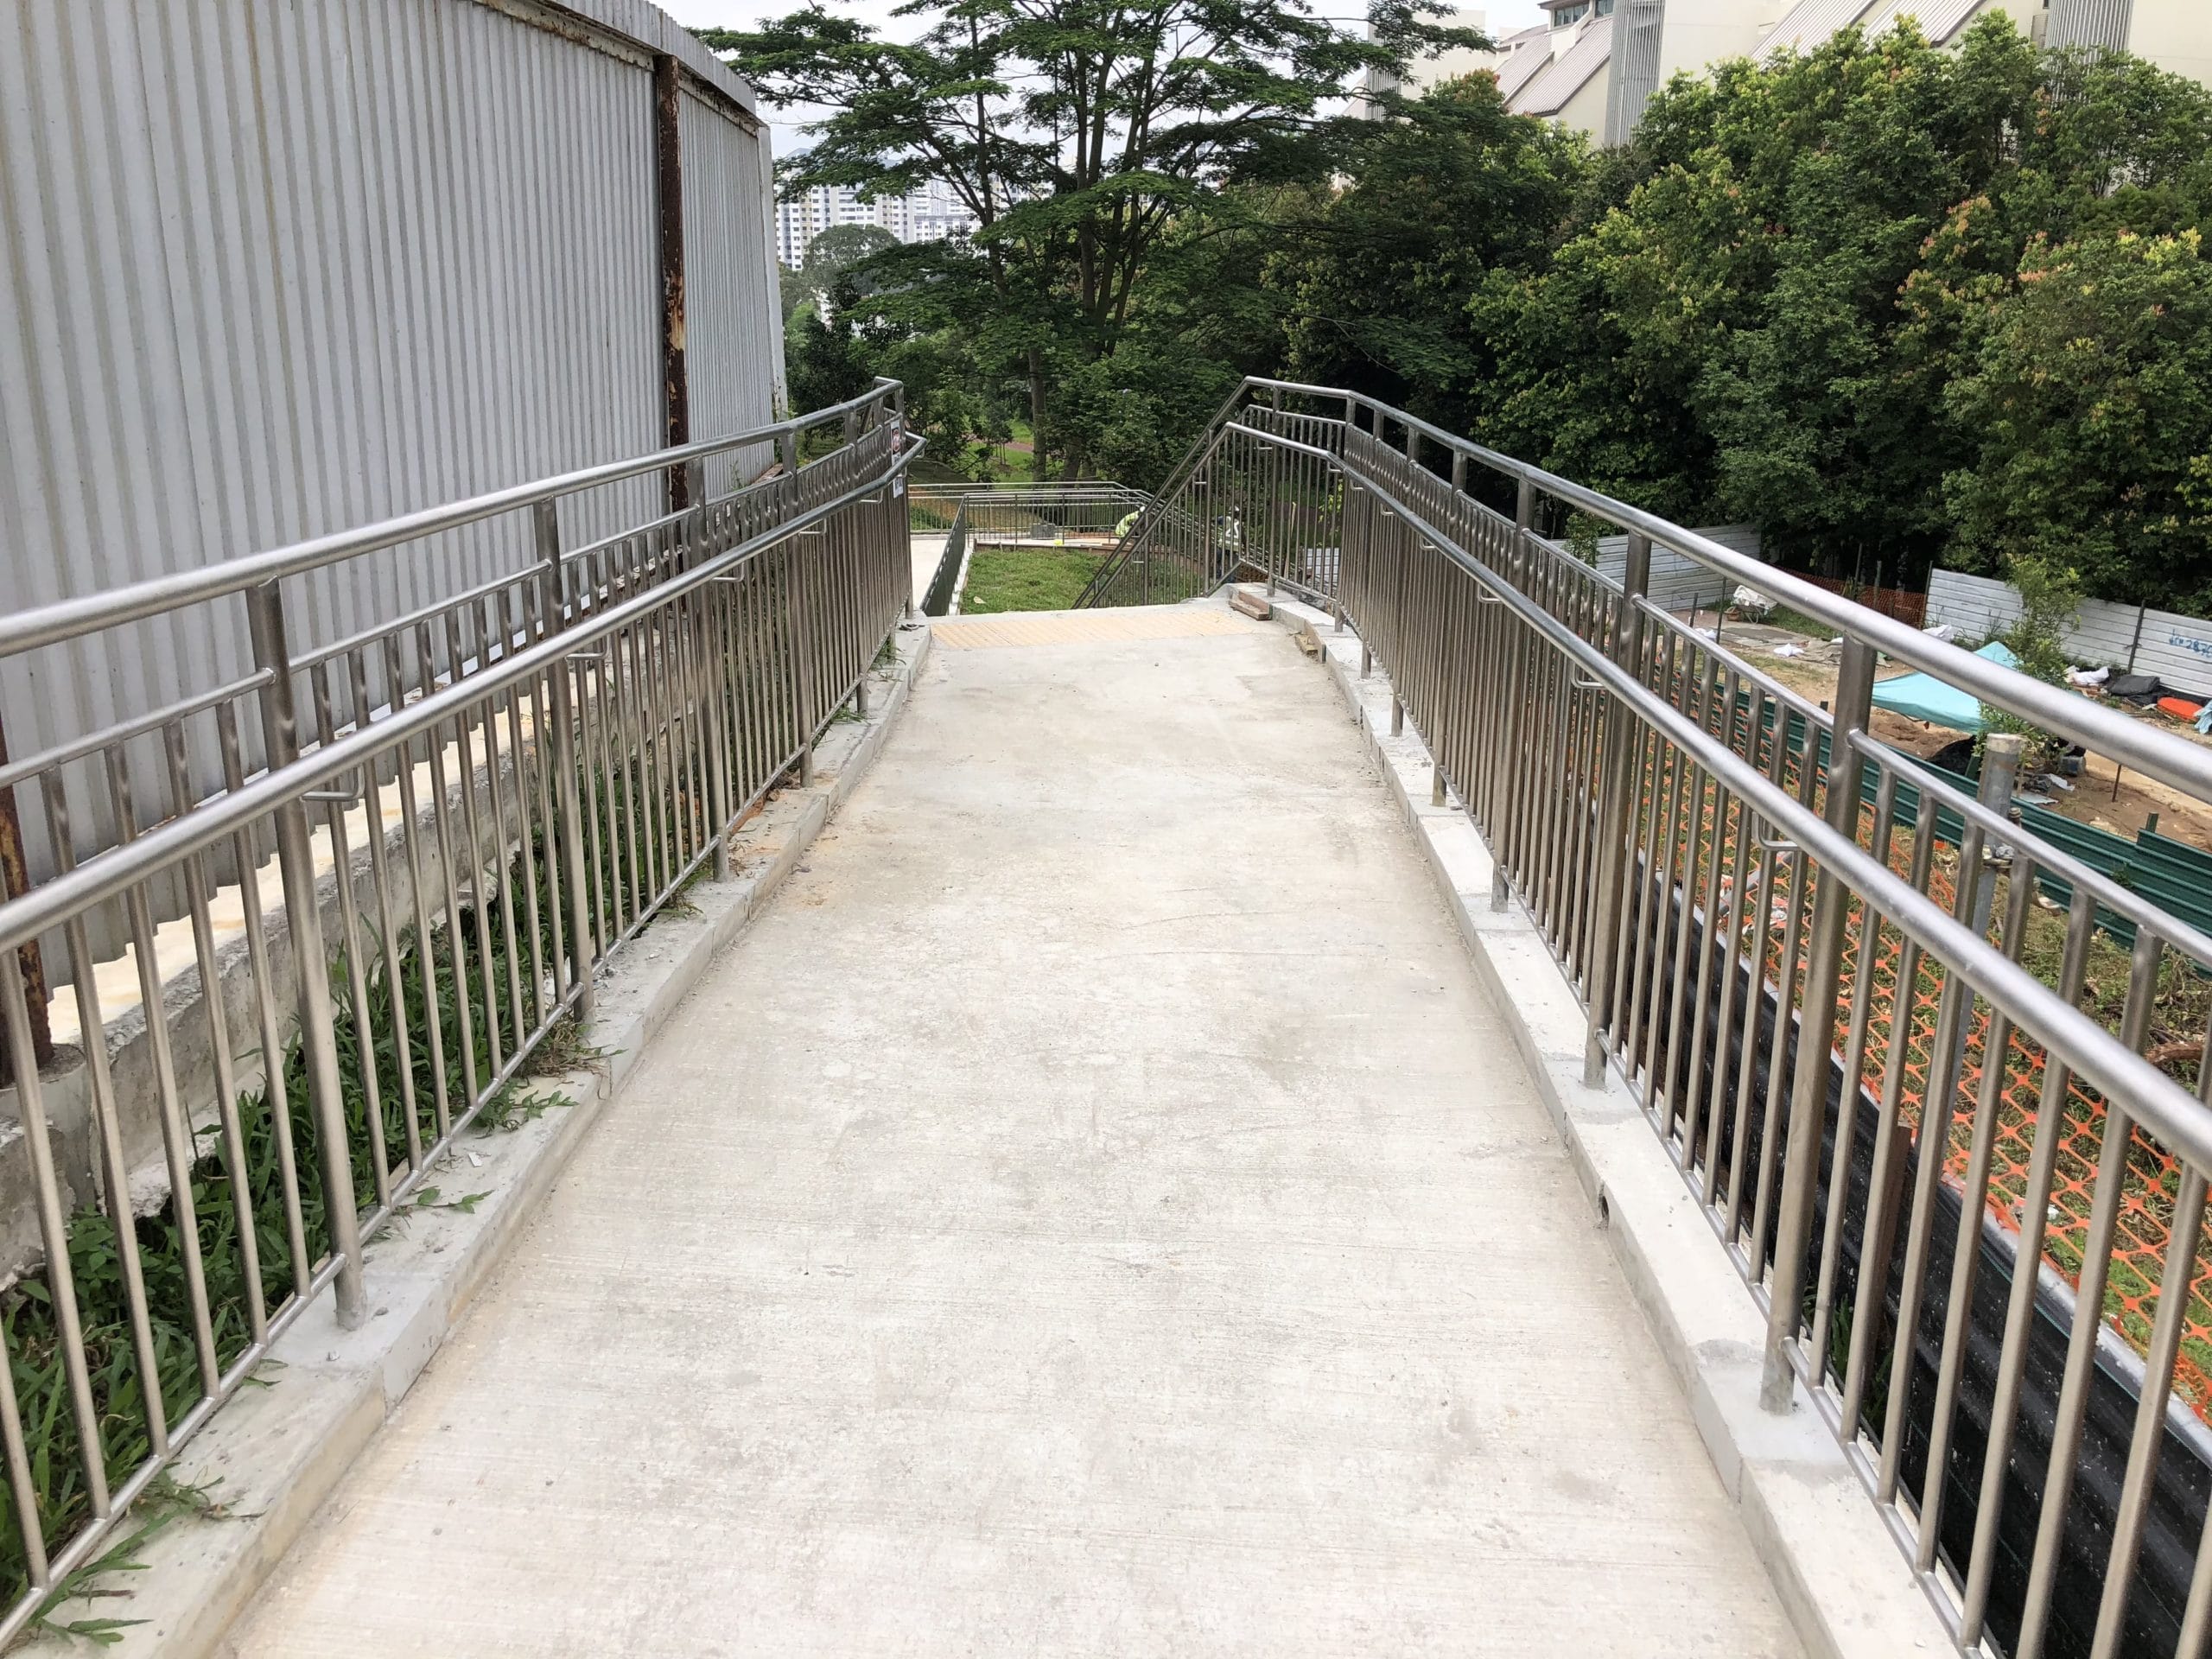 Well constructed stainless steel metal railing along a concrete pathway situated in a park by Brooklynz Singapore